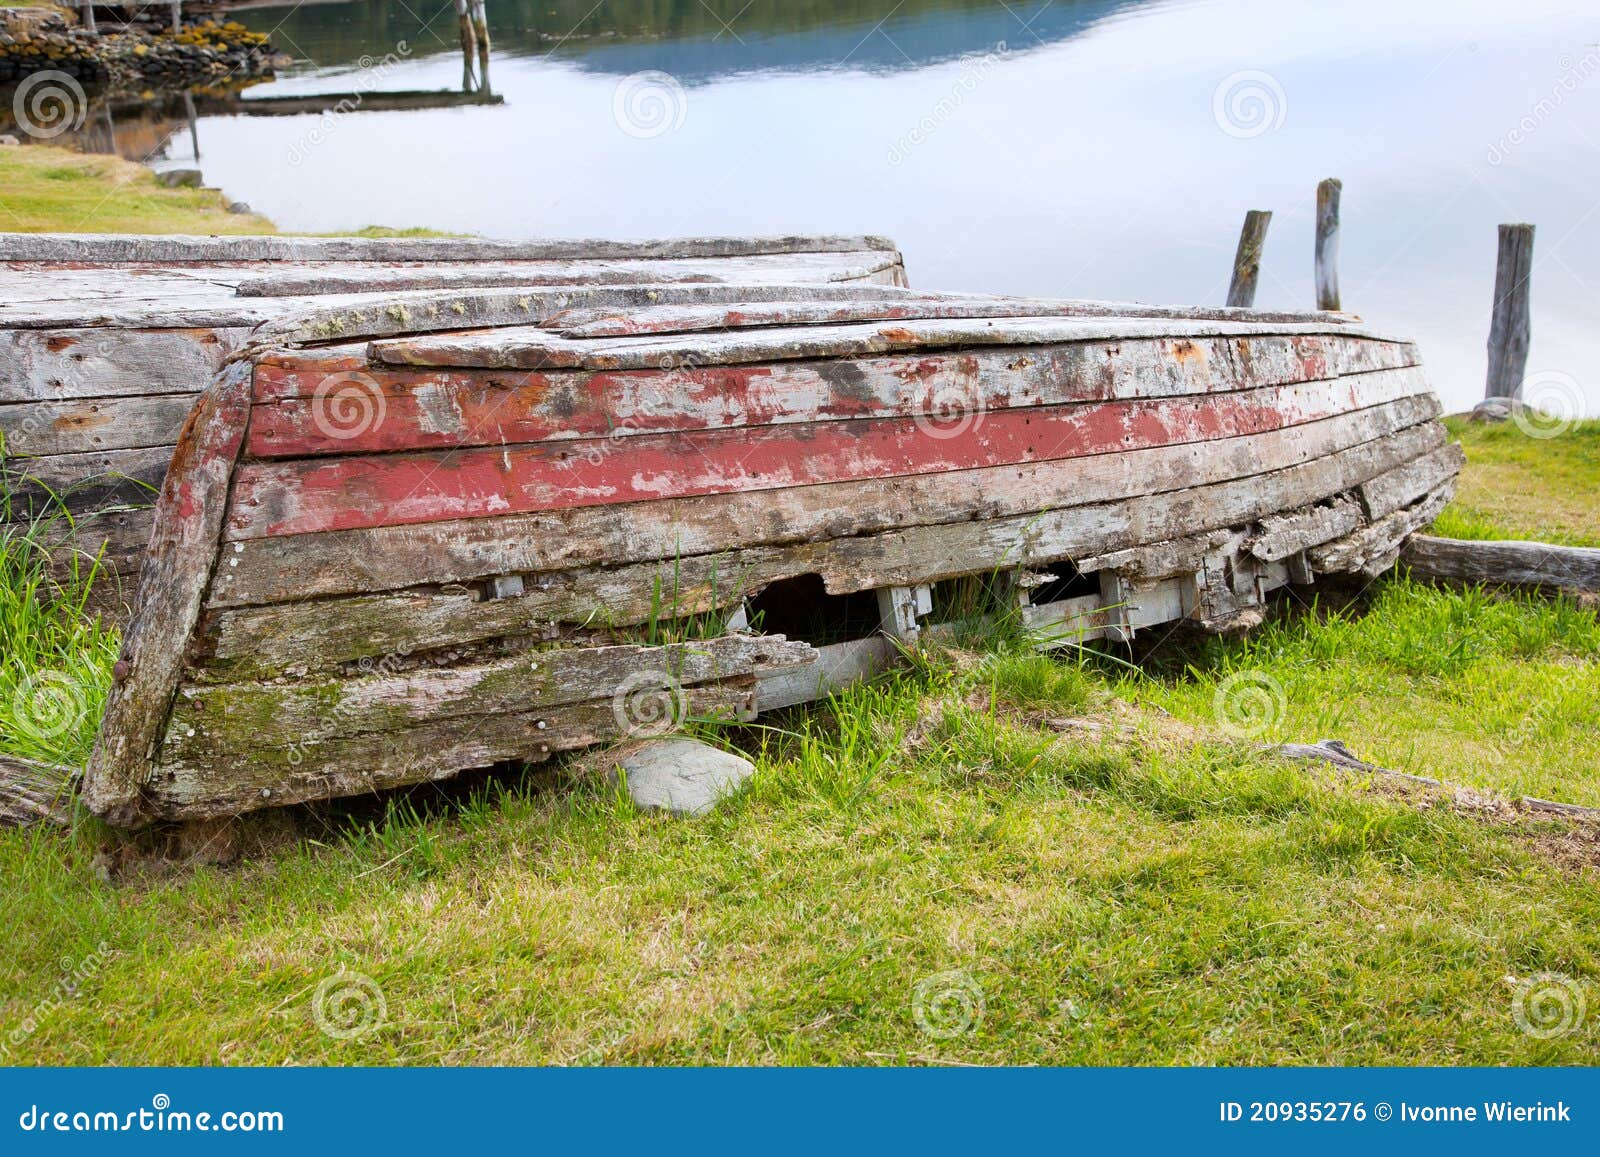 Rotten Wooden Row Boat Royalty Free Stock Image - Image: 20935276